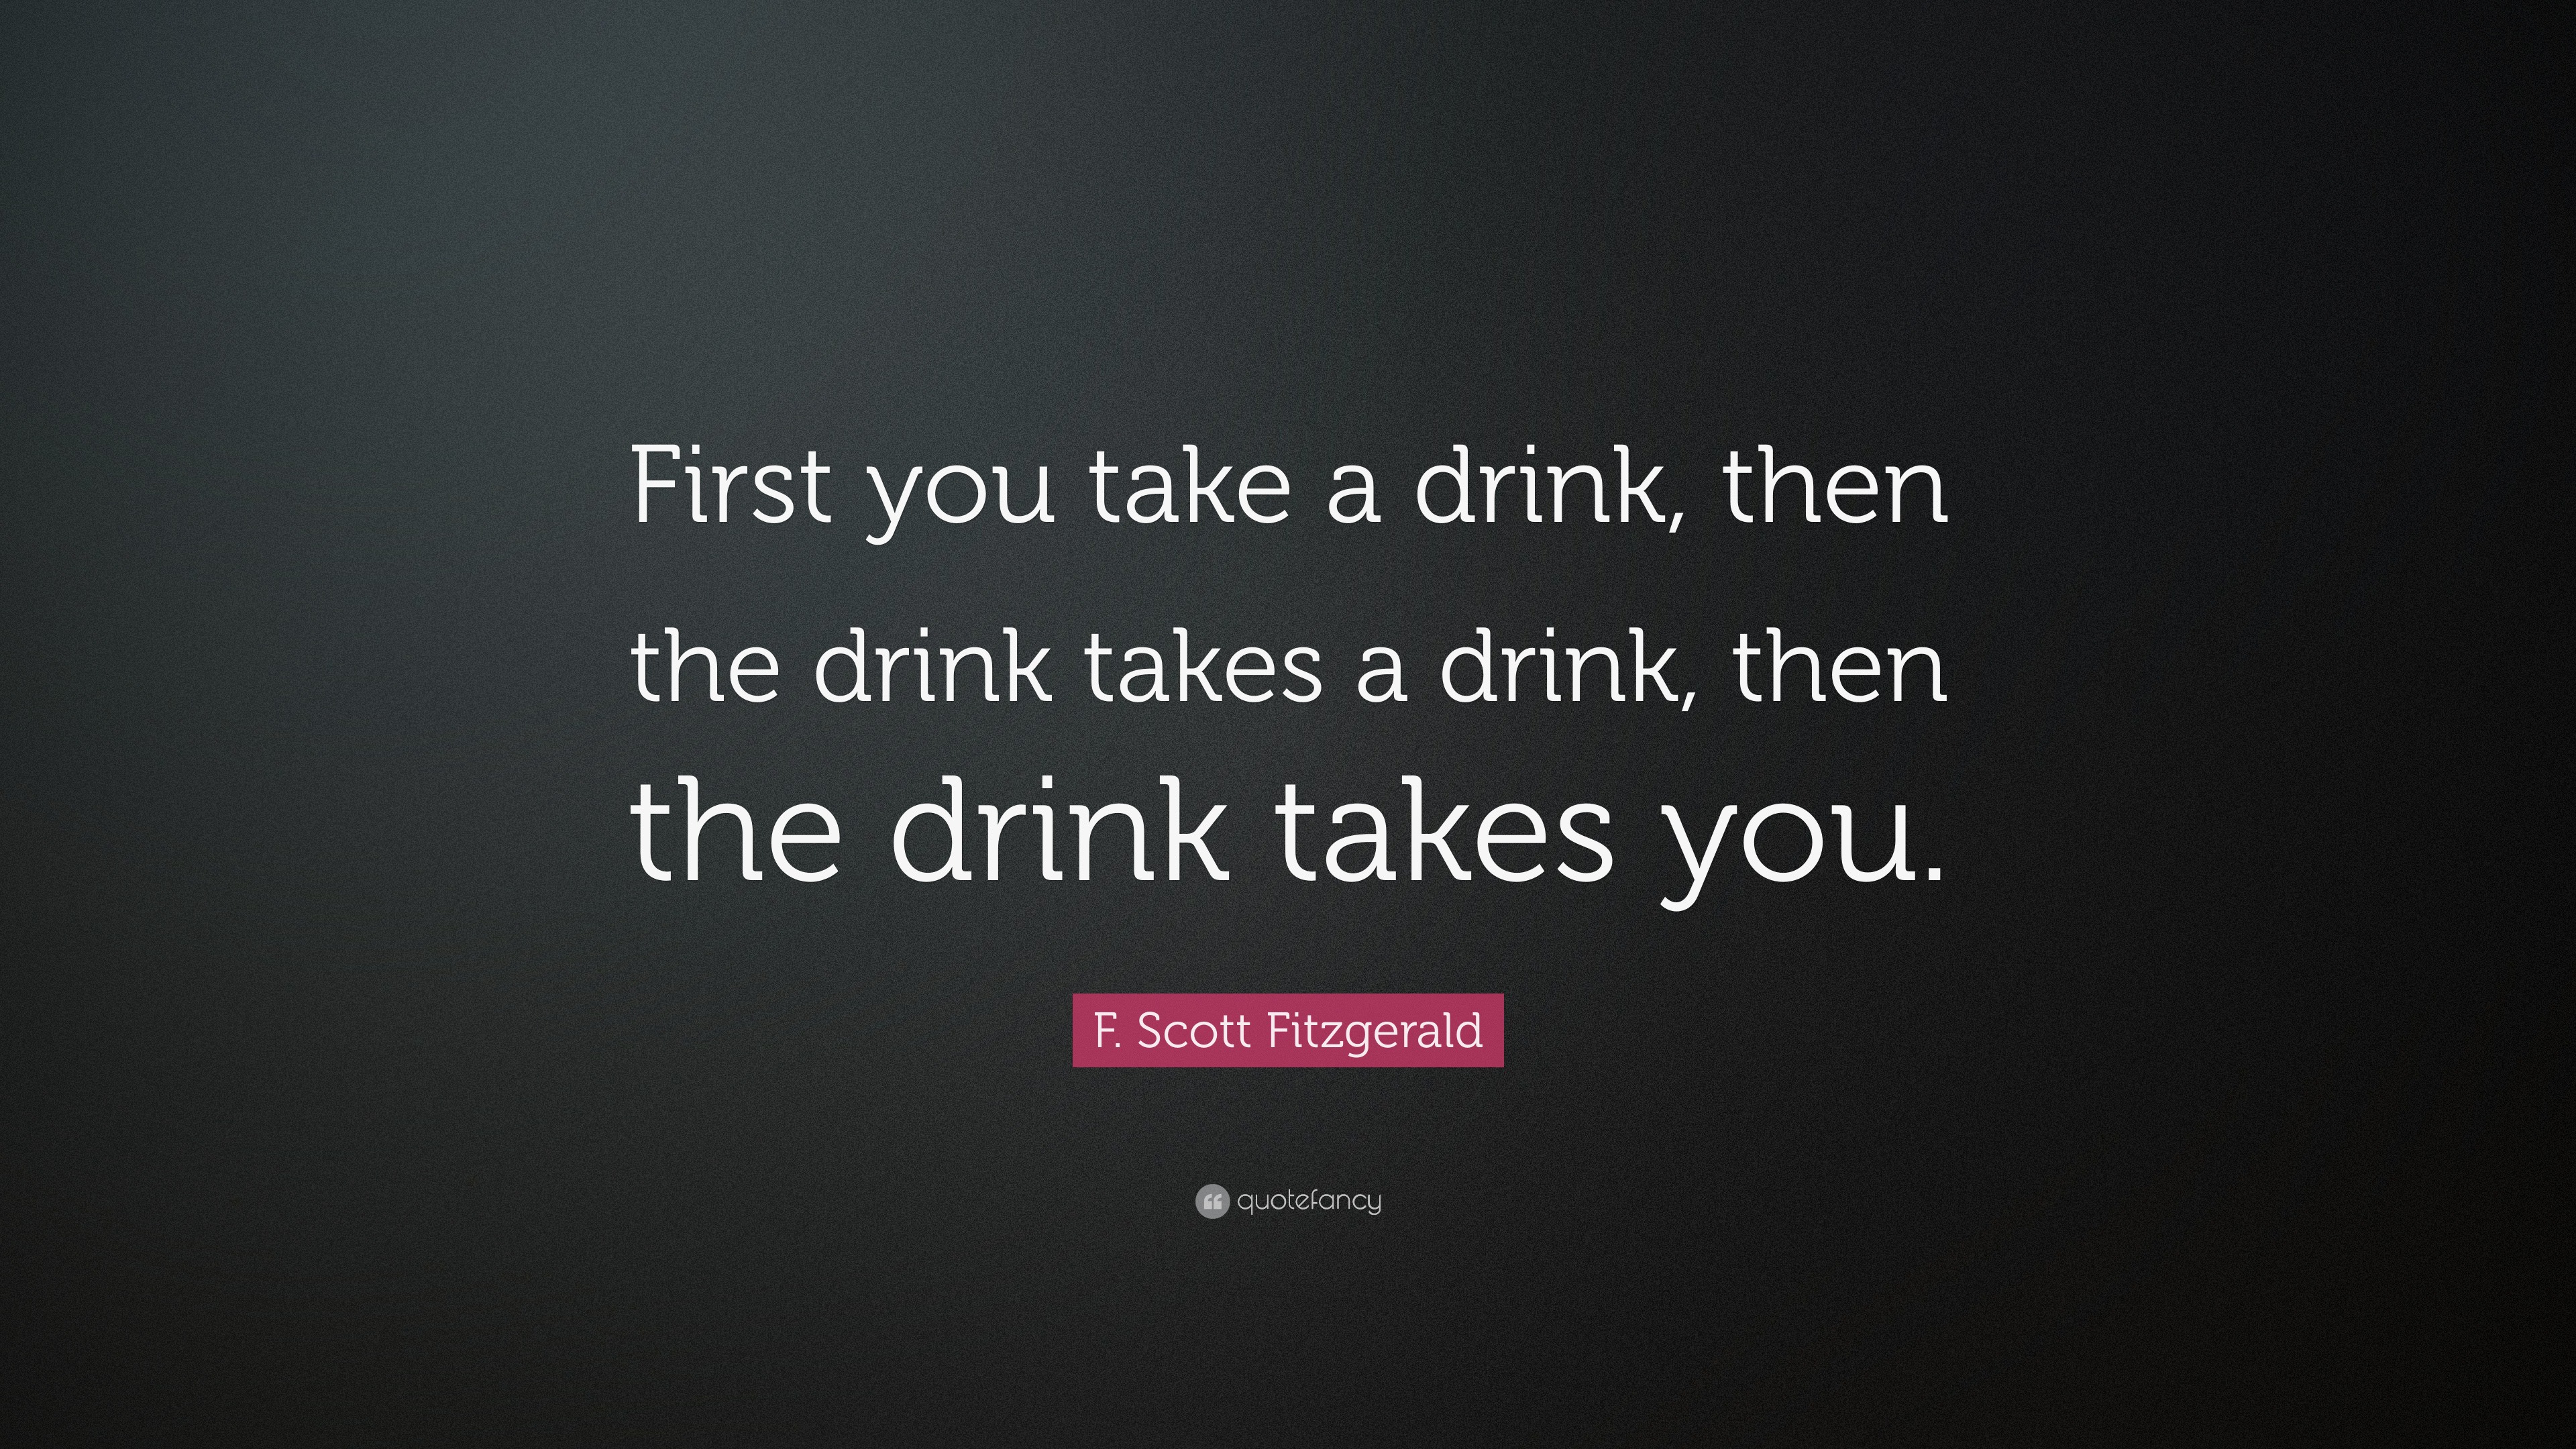 F Scott Fitzgerald Quote First You Take A Drink Then The Drink Takes A Drink Then